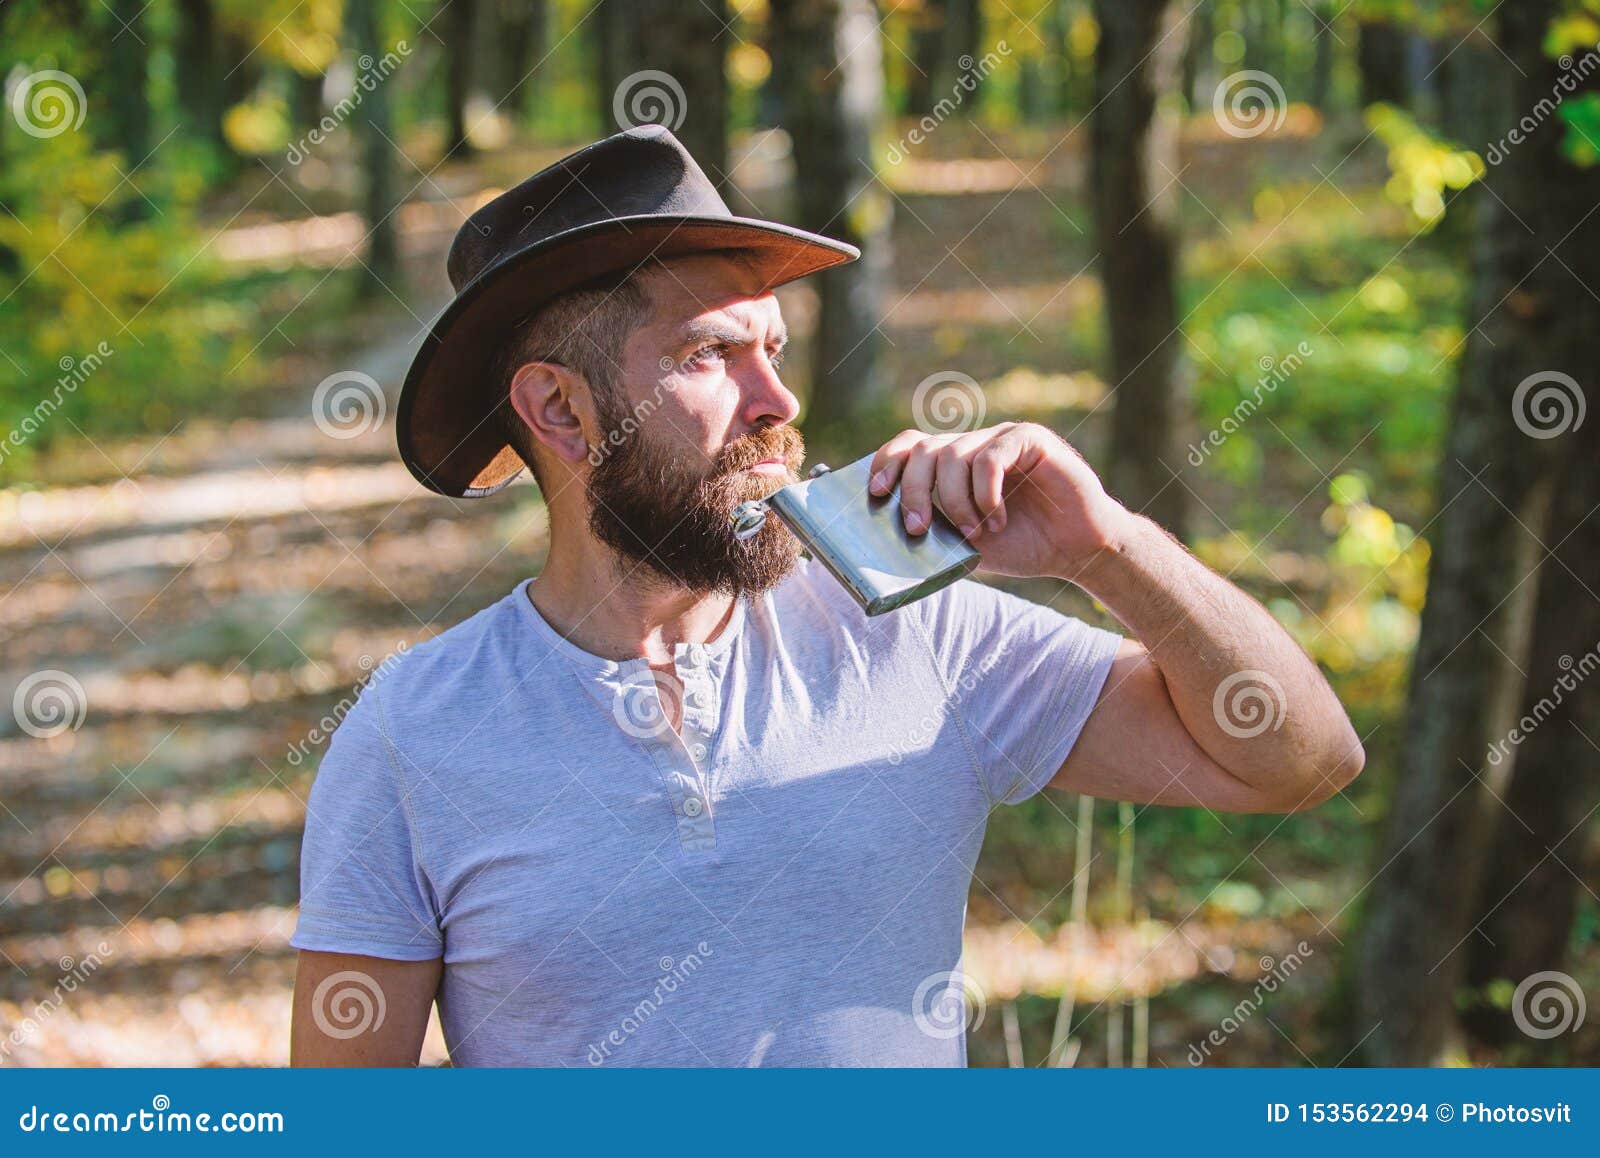 Bearded Man in Cowboy Hat Walk in Park Outdoor. Man Hipster Relax in ...